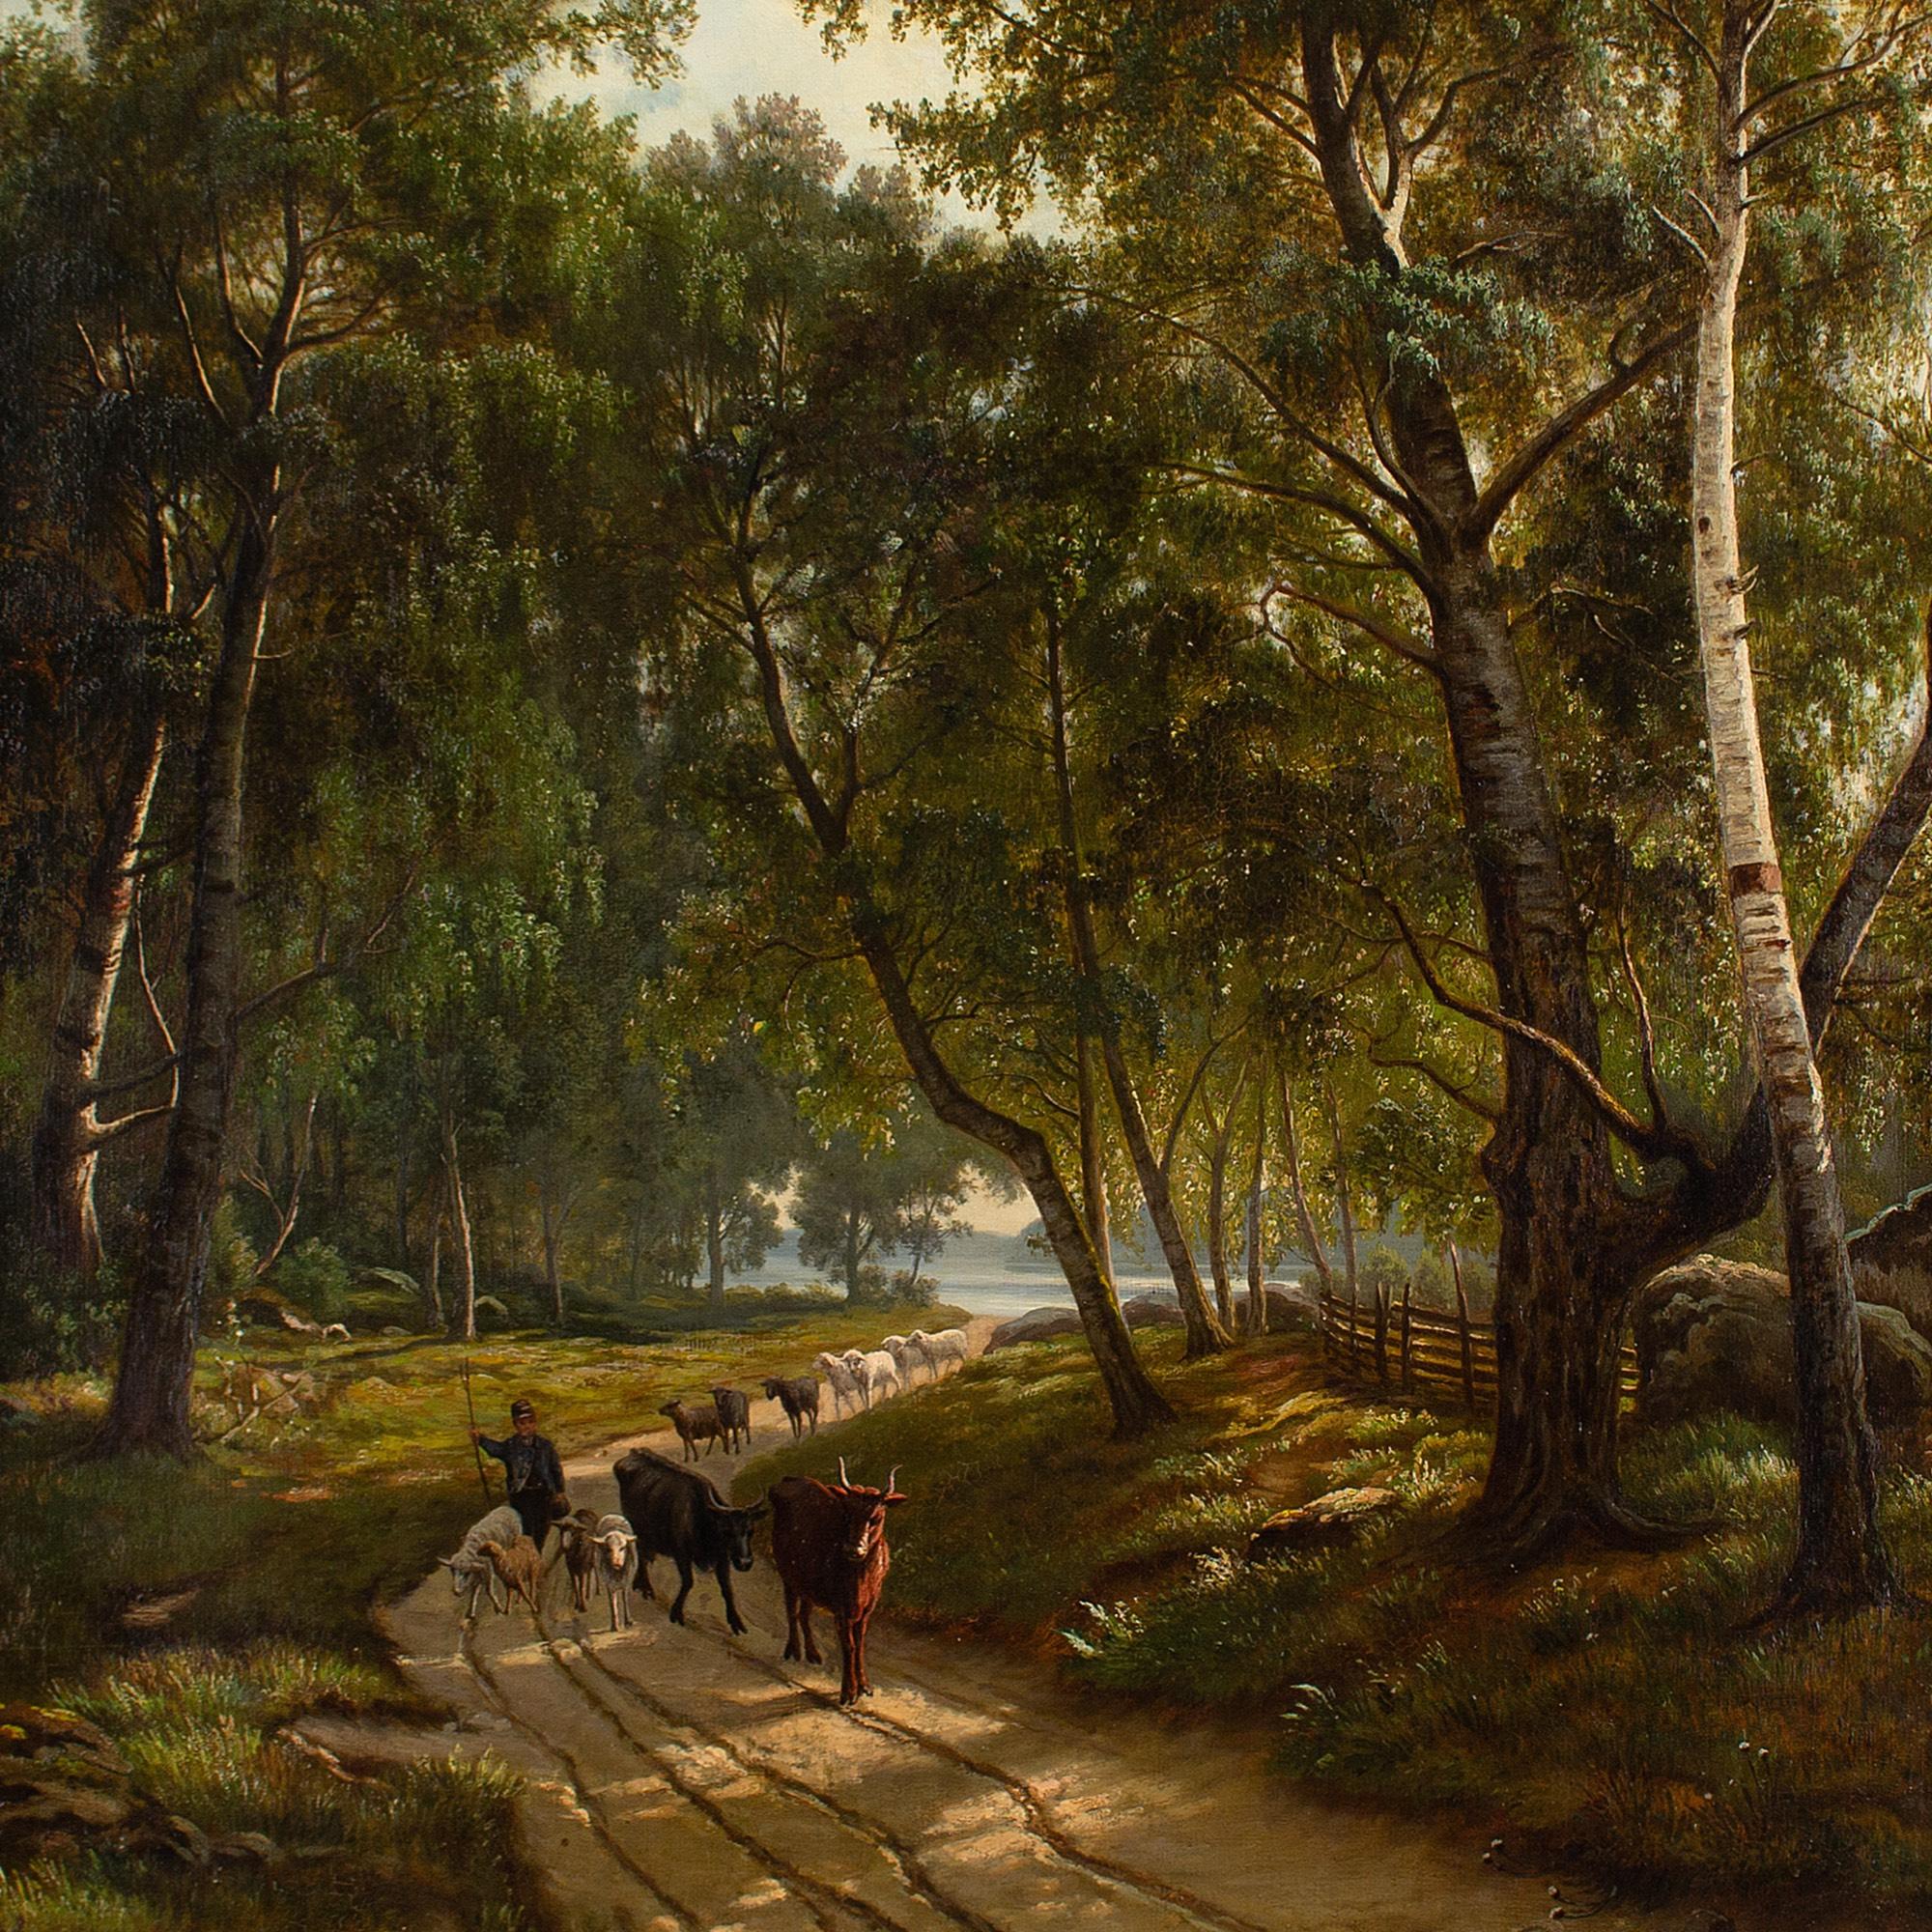 This mid-19th-century Danish oil painting depicts a forest landscape with meandering cattle.

Ambling under an epic canopy of twisting birch, a cattle drover guides his livestock. Contorted silvery forms echoed in the cart tracks. Beyond them, a